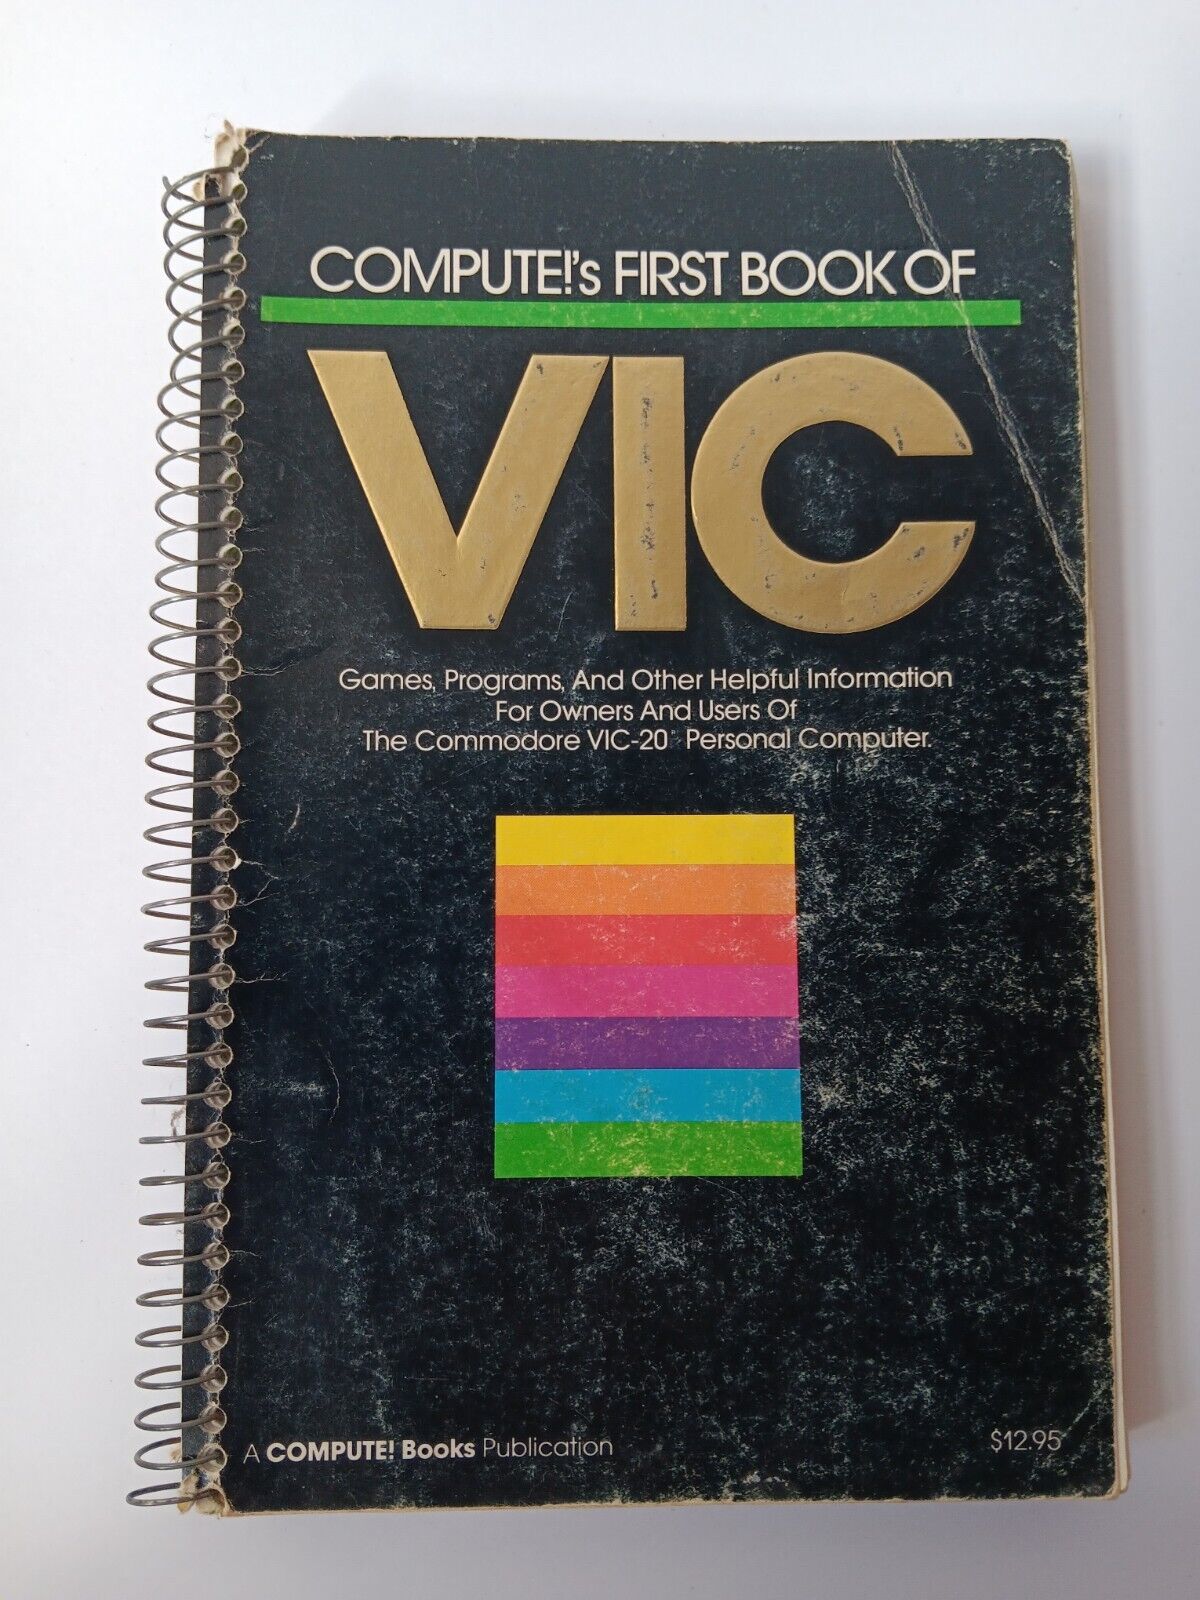 Computes First Book Of VIC Games Programs & Helpful Info Commodore VIC 20 